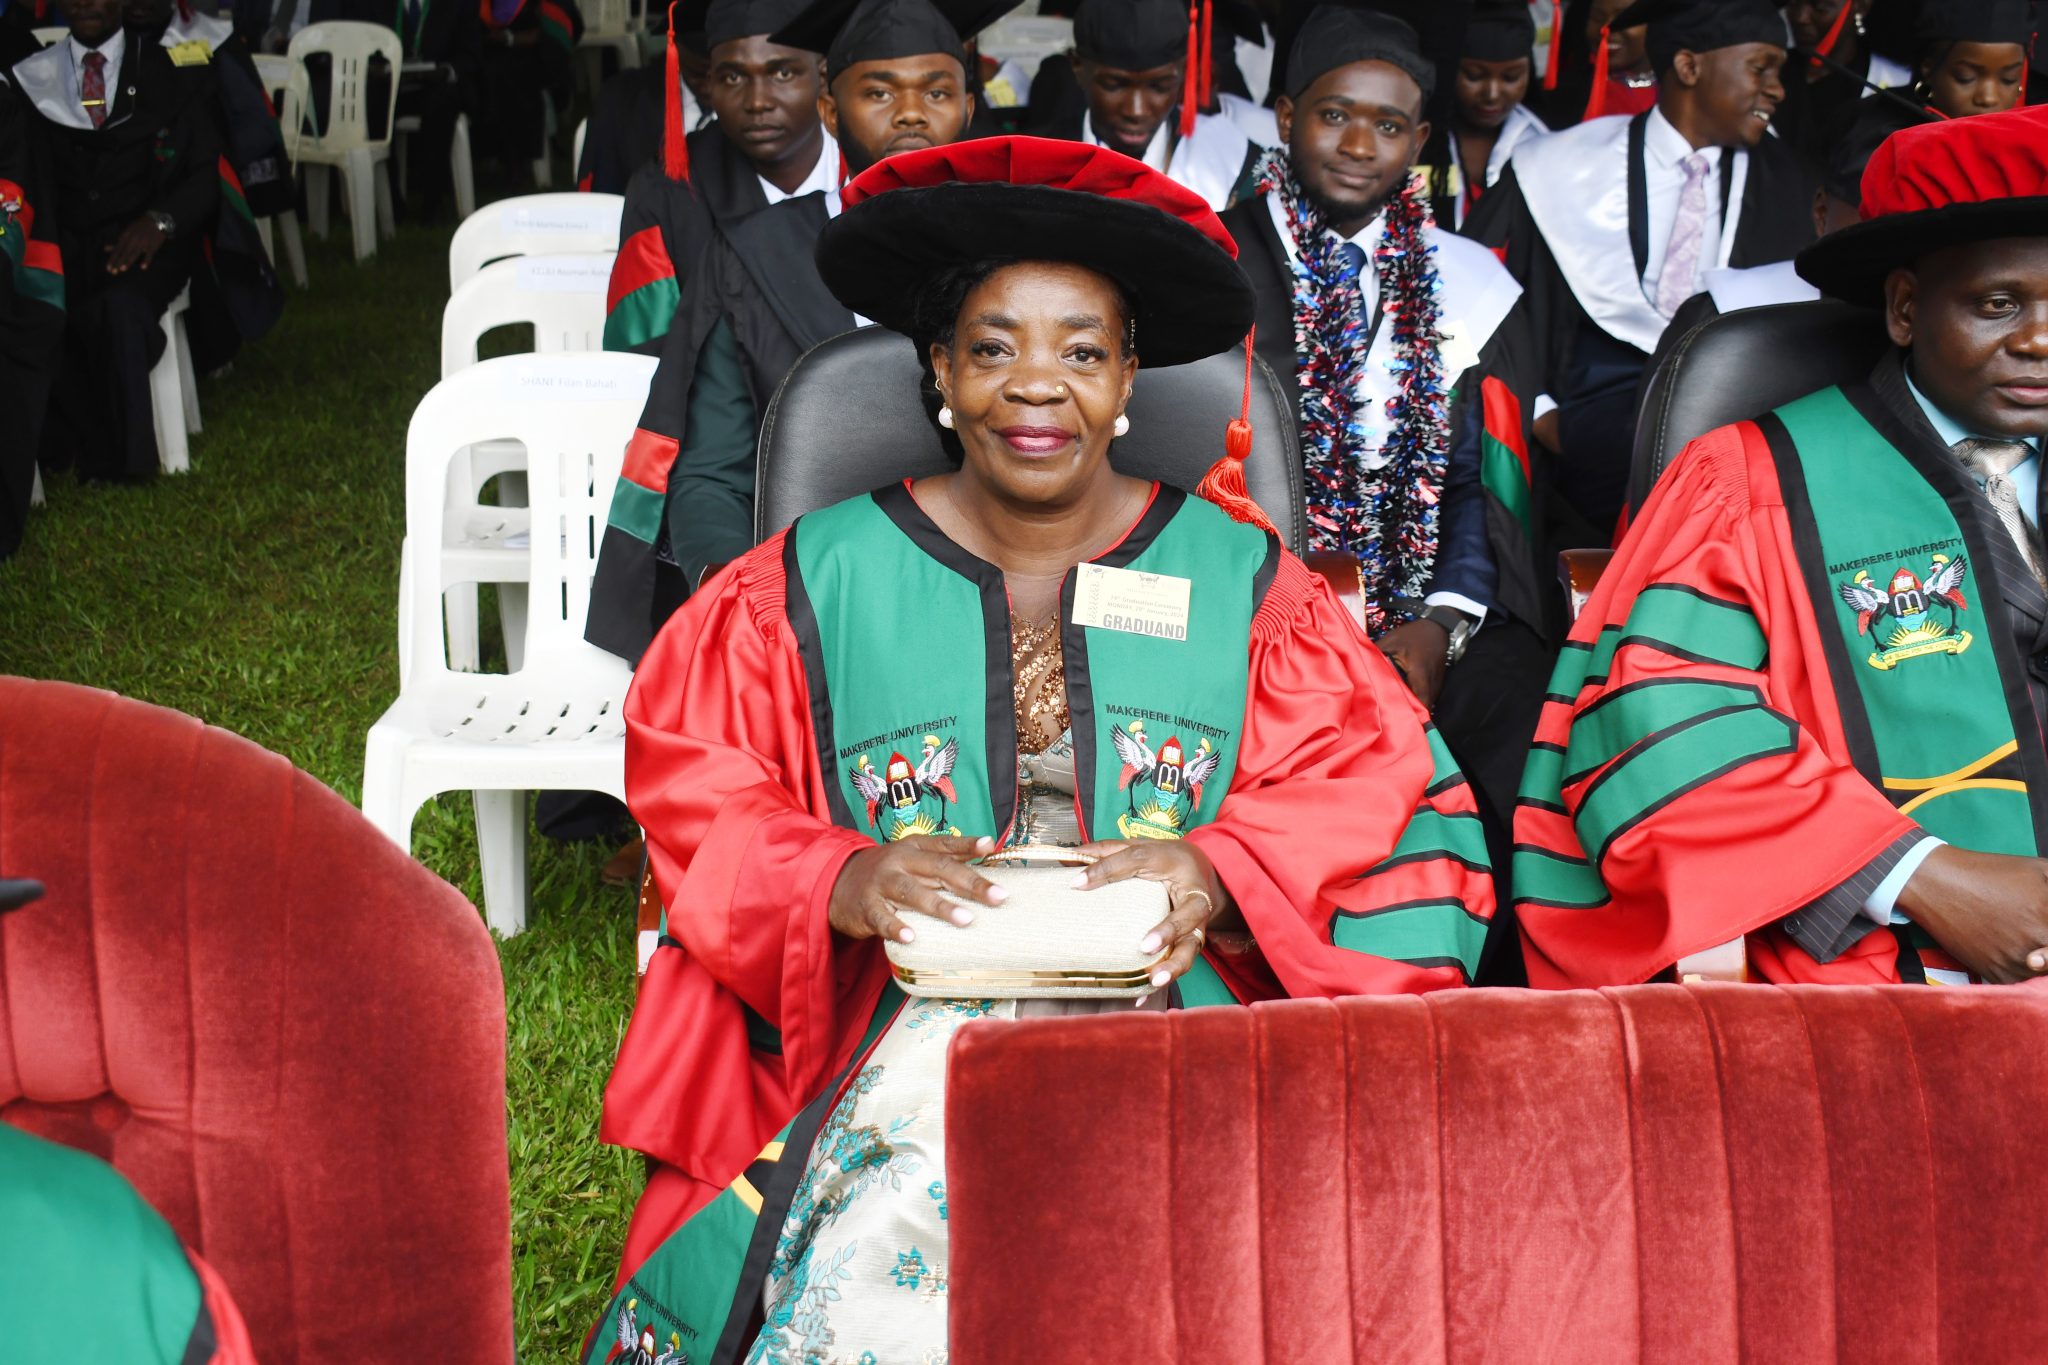 Dr. NAKIBUULE GLADYS KISEKKA, the Second Female Recipient of a Doctor of Laws, of Makerere University